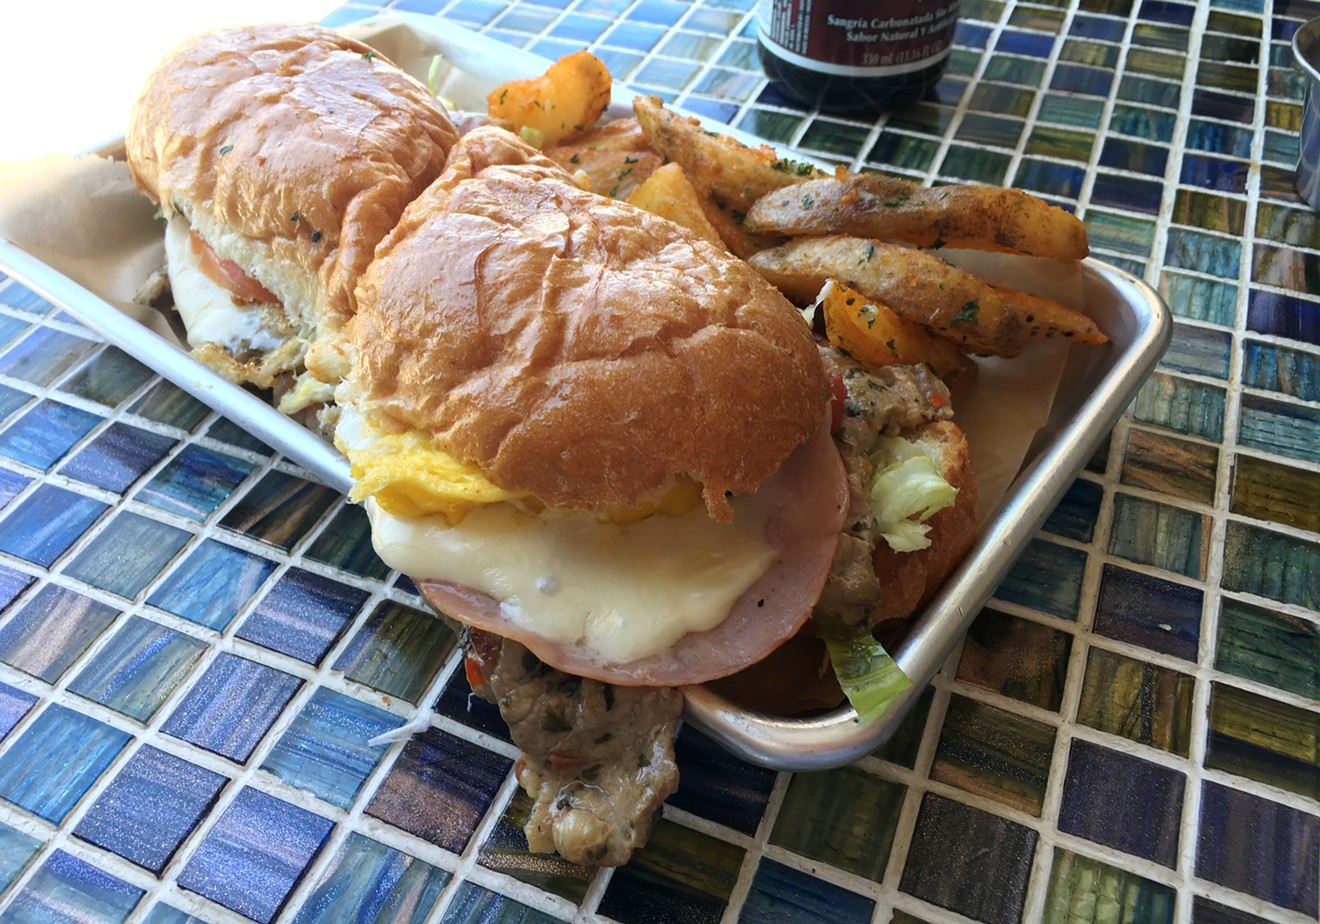 Carne's lomito sandwich is loadd with grilled pork, ham eggs and cheese.